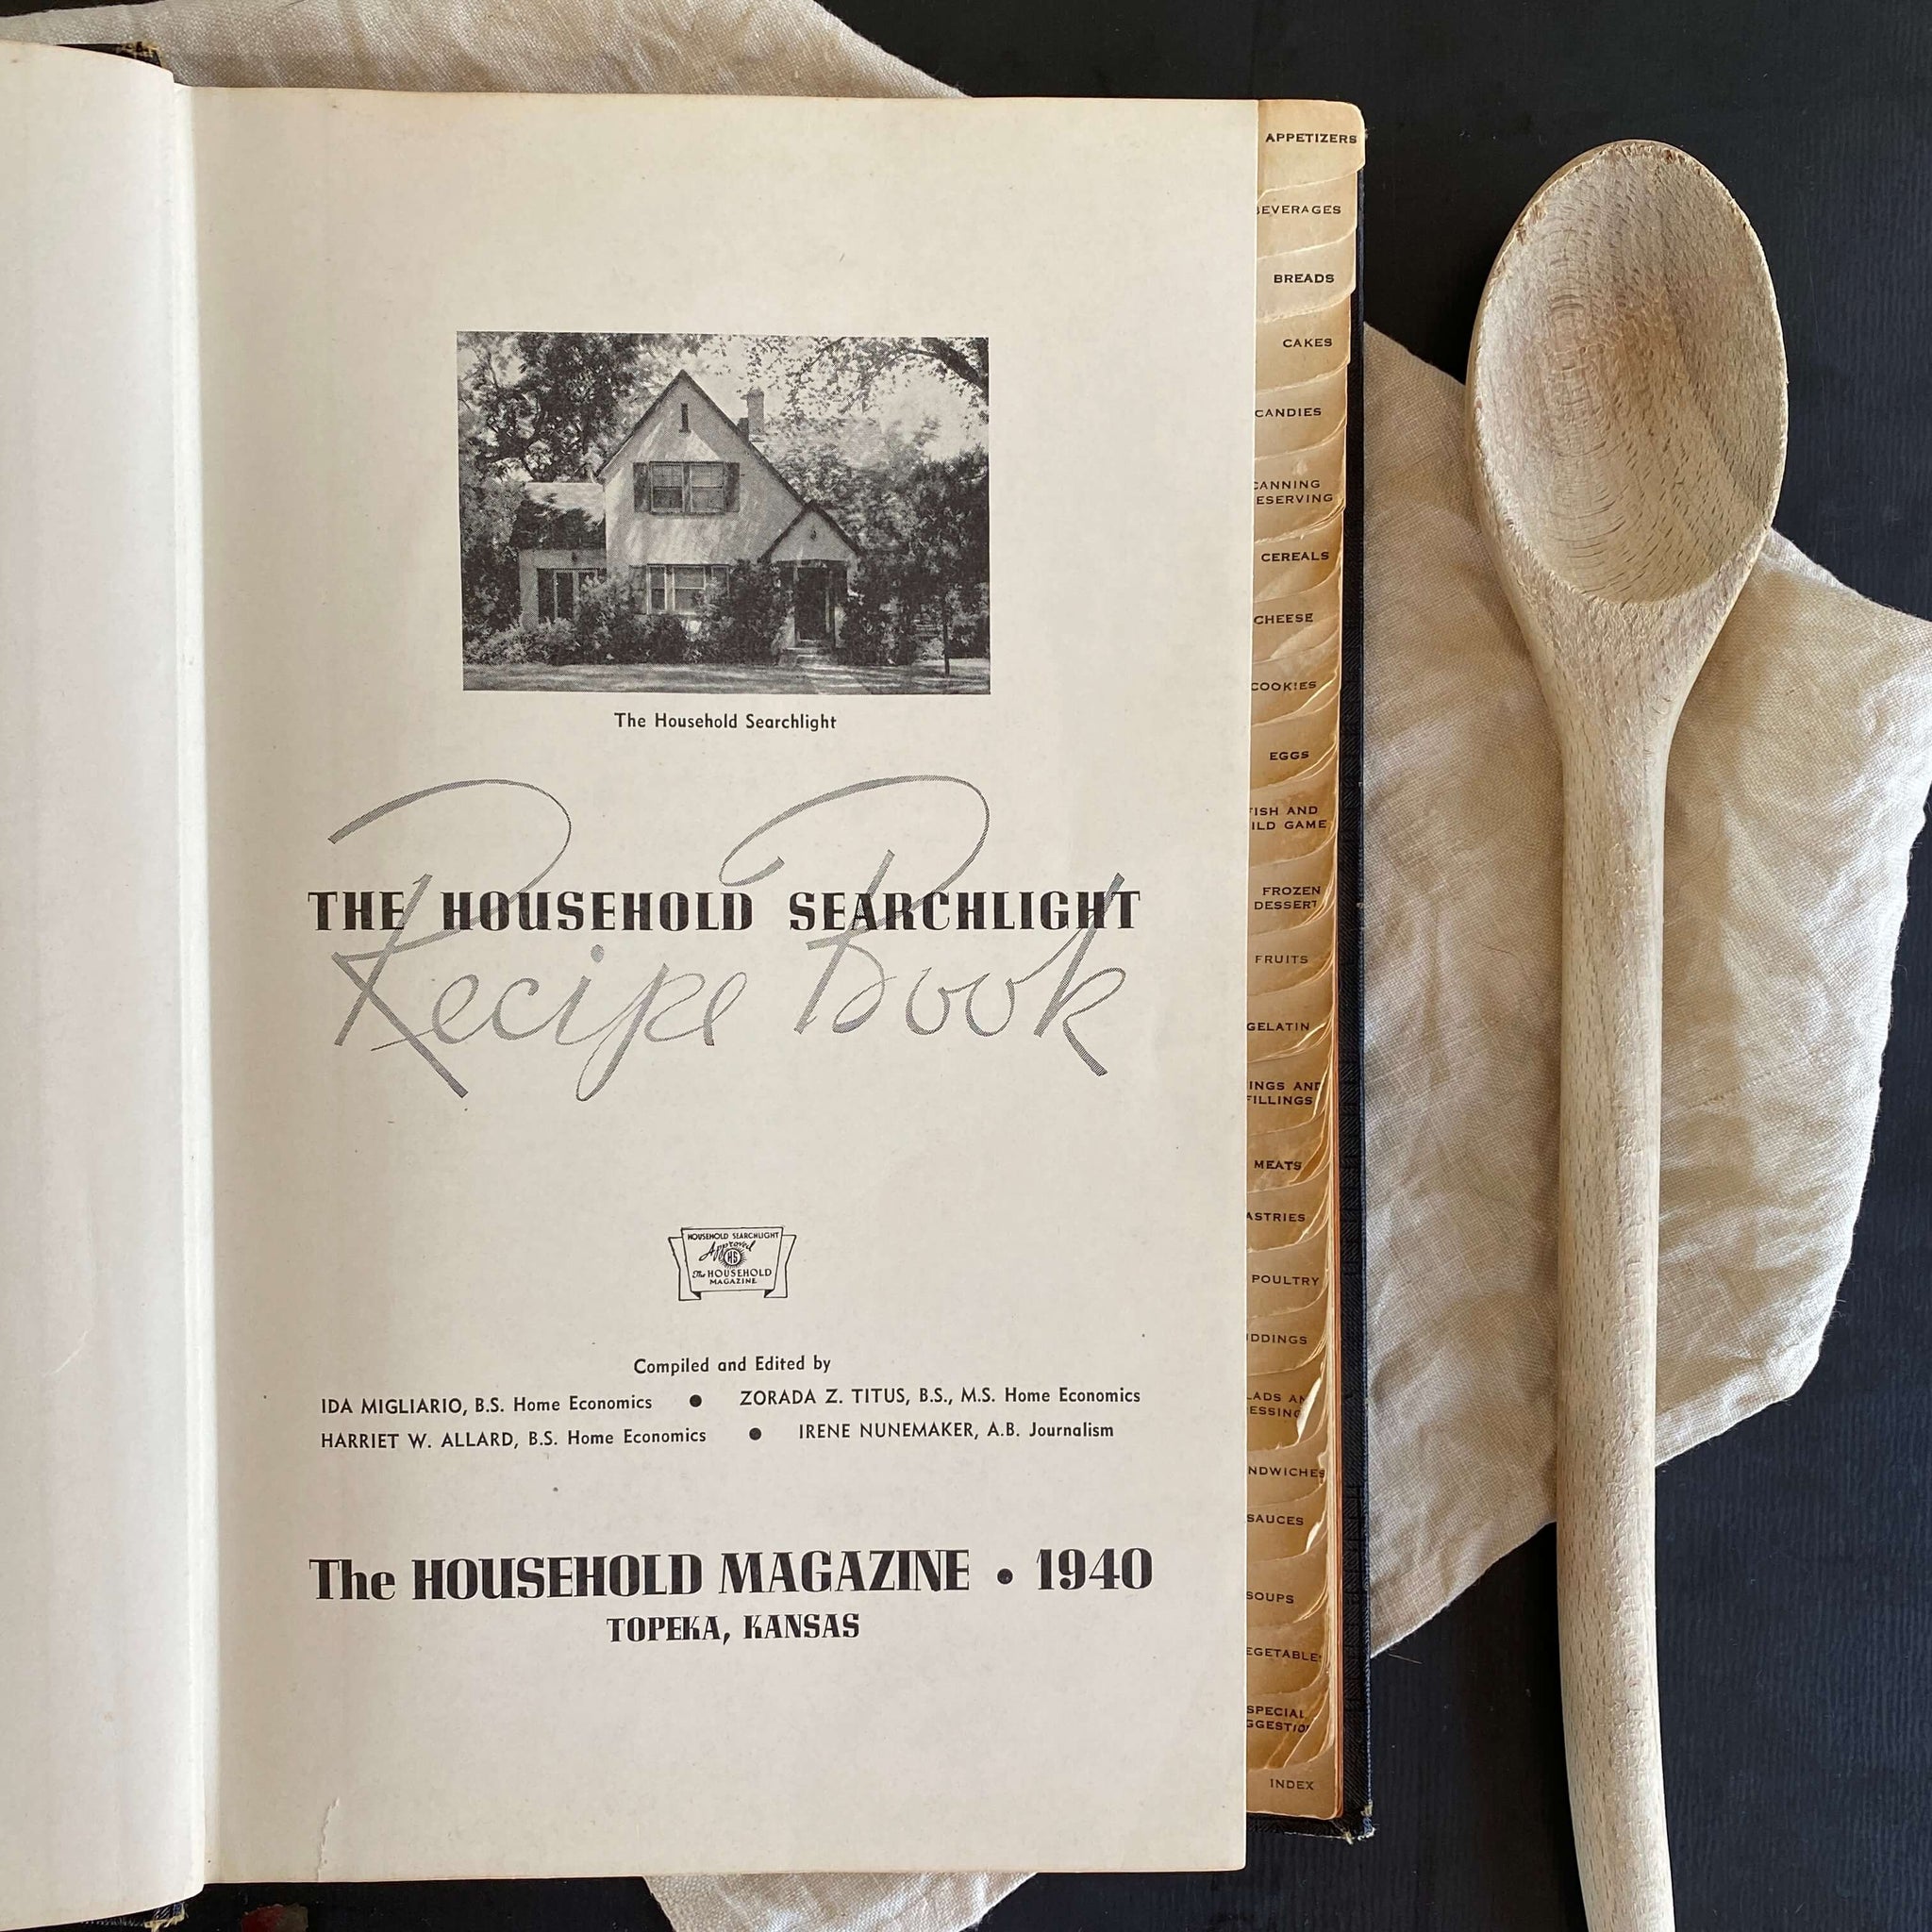 The Household Searchlight Recipe Book - 1940 Edition 13th Printing